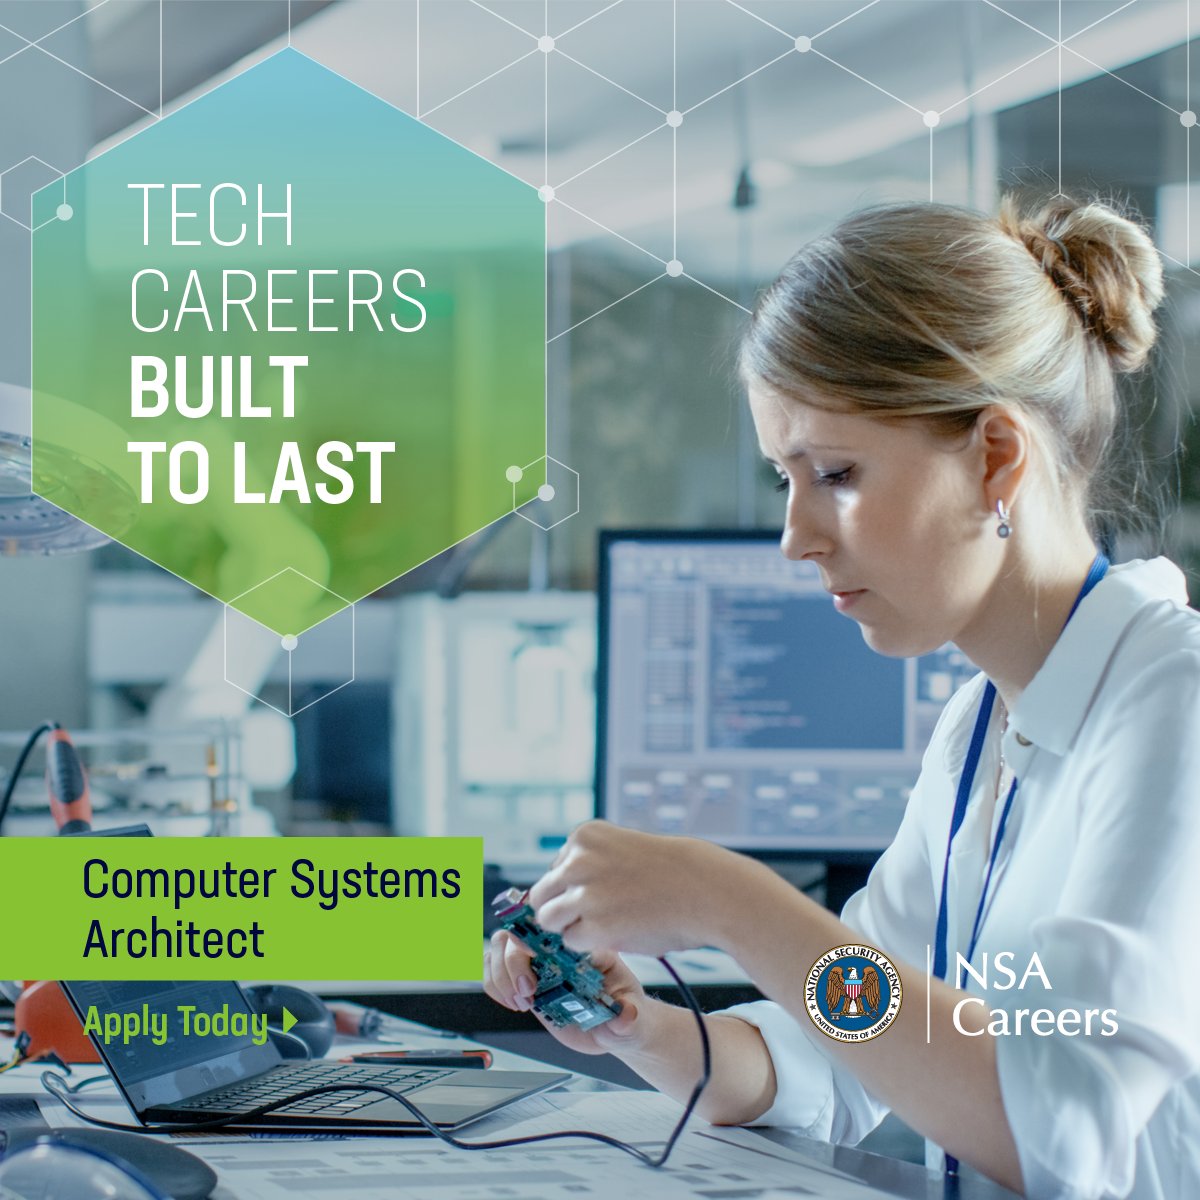 Use your systems administration, network protocol, programming or scripting experience to drive IT projects at NSA. Apply now to become a #computersystemsarchitect. bit.ly/4b1YvcC #techcareers